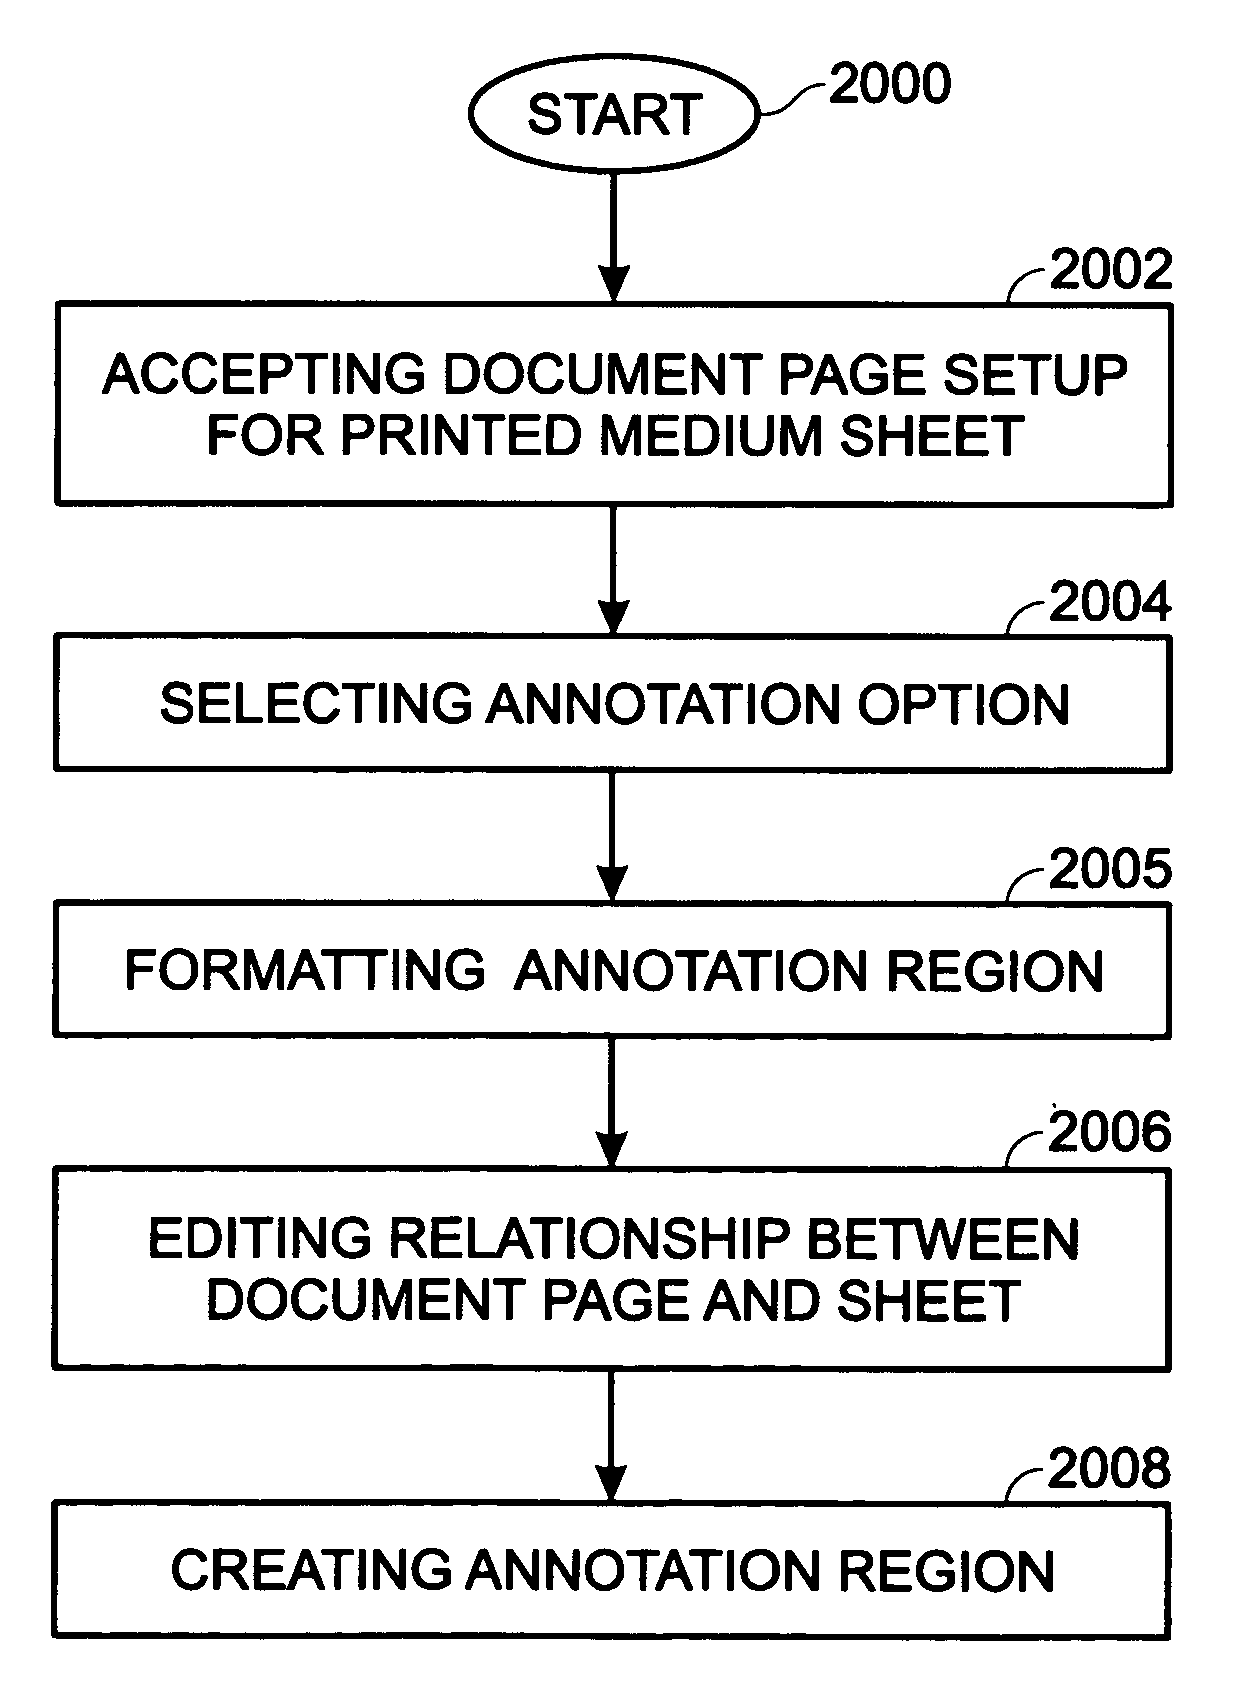 Manual annotation document reformation